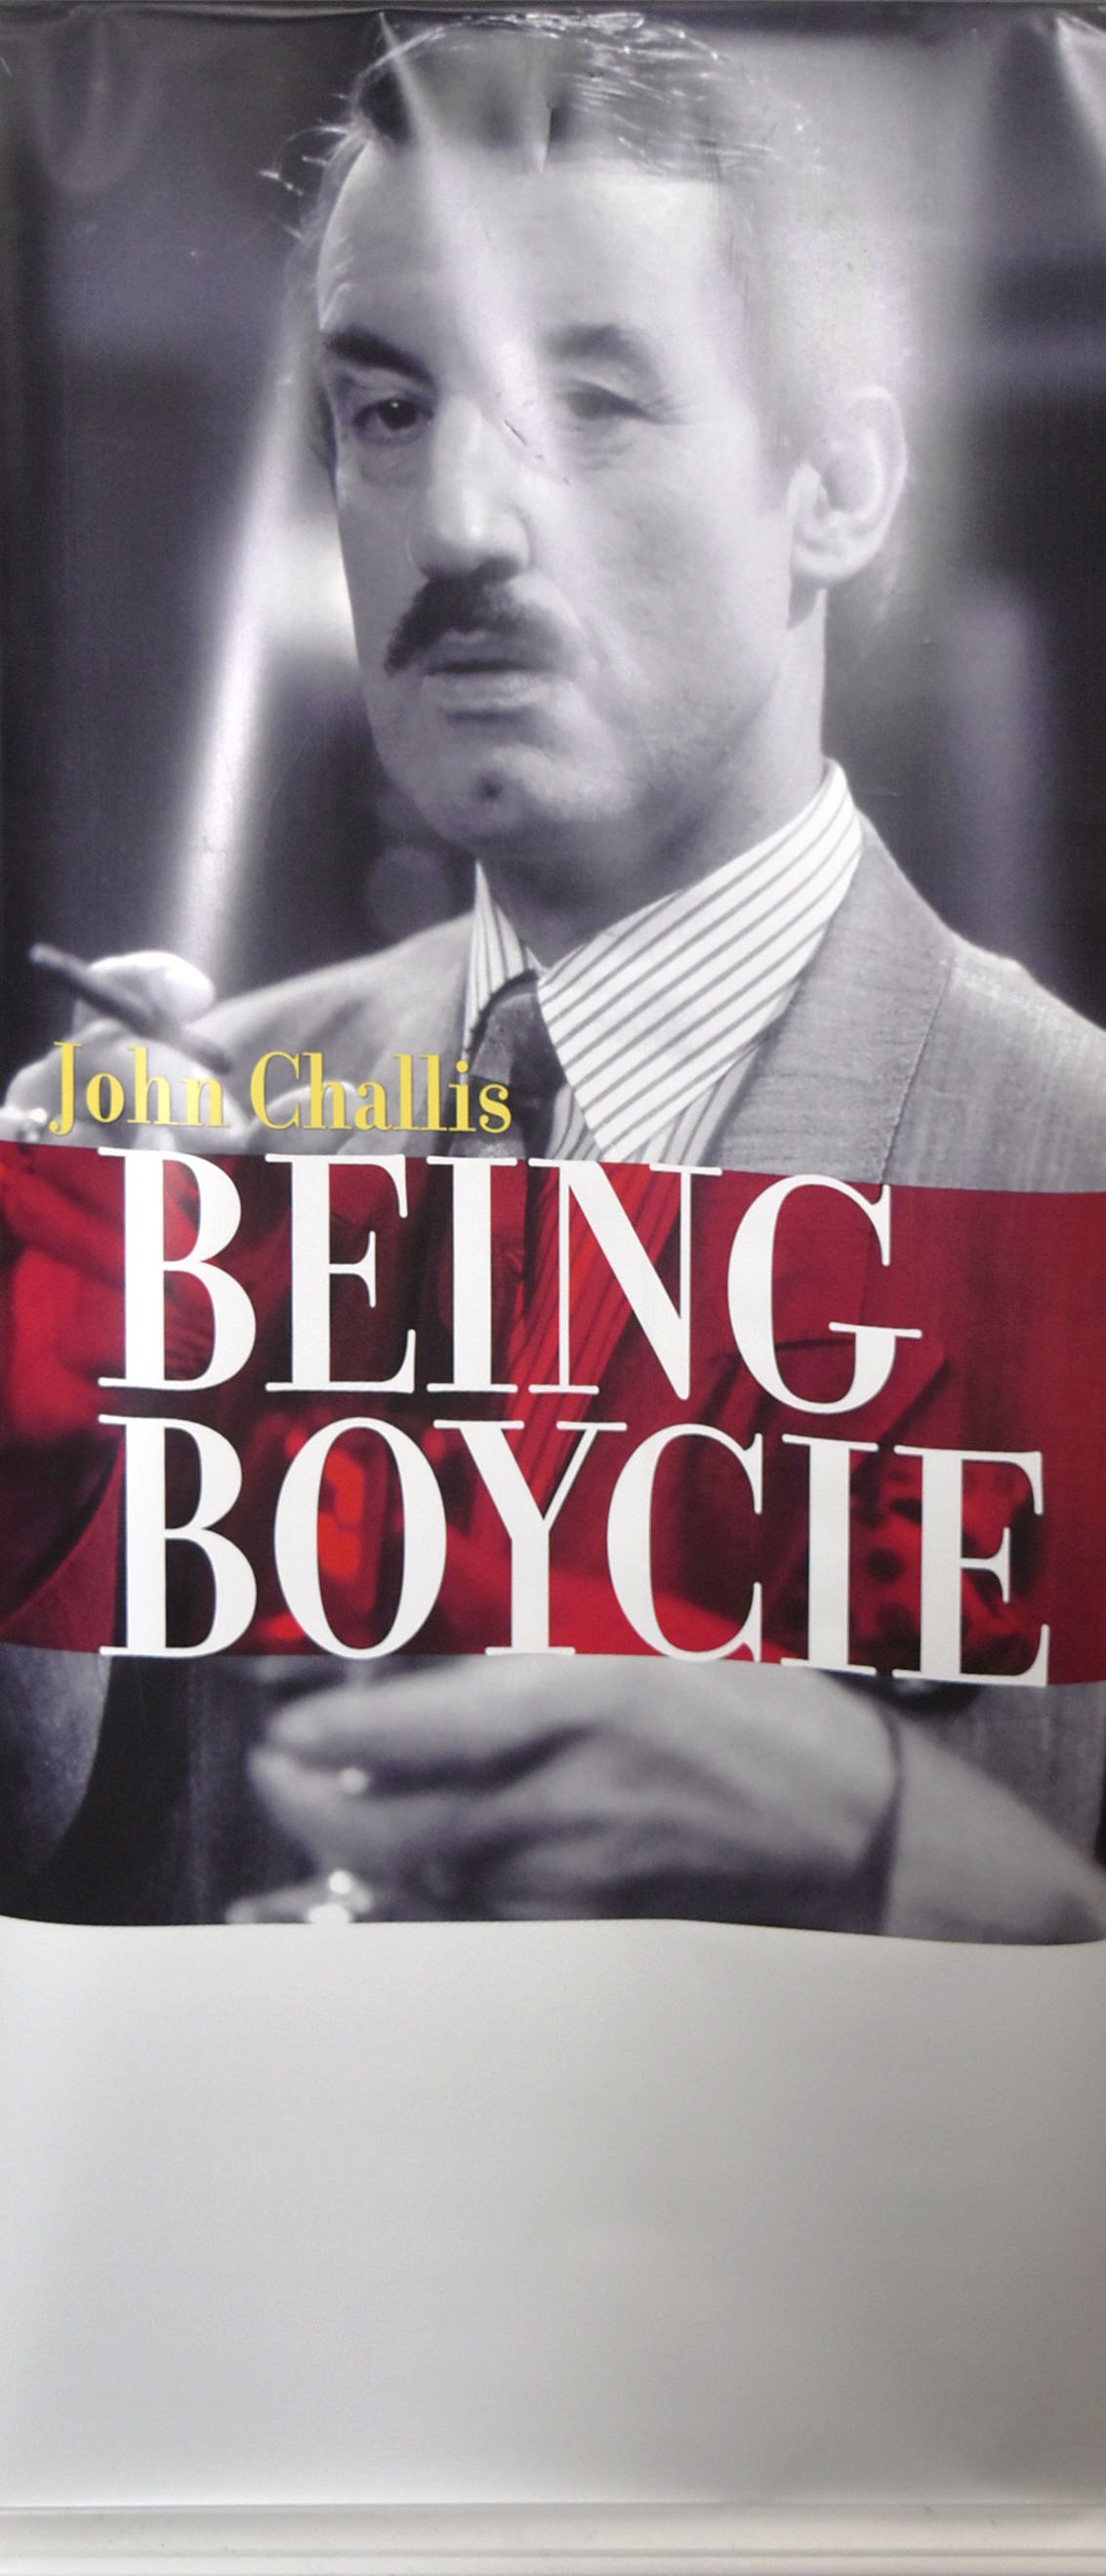 ESTATE OF JOHN CHALLIS - PERSONAL APPEARANCE BANNERS - Image 2 of 7